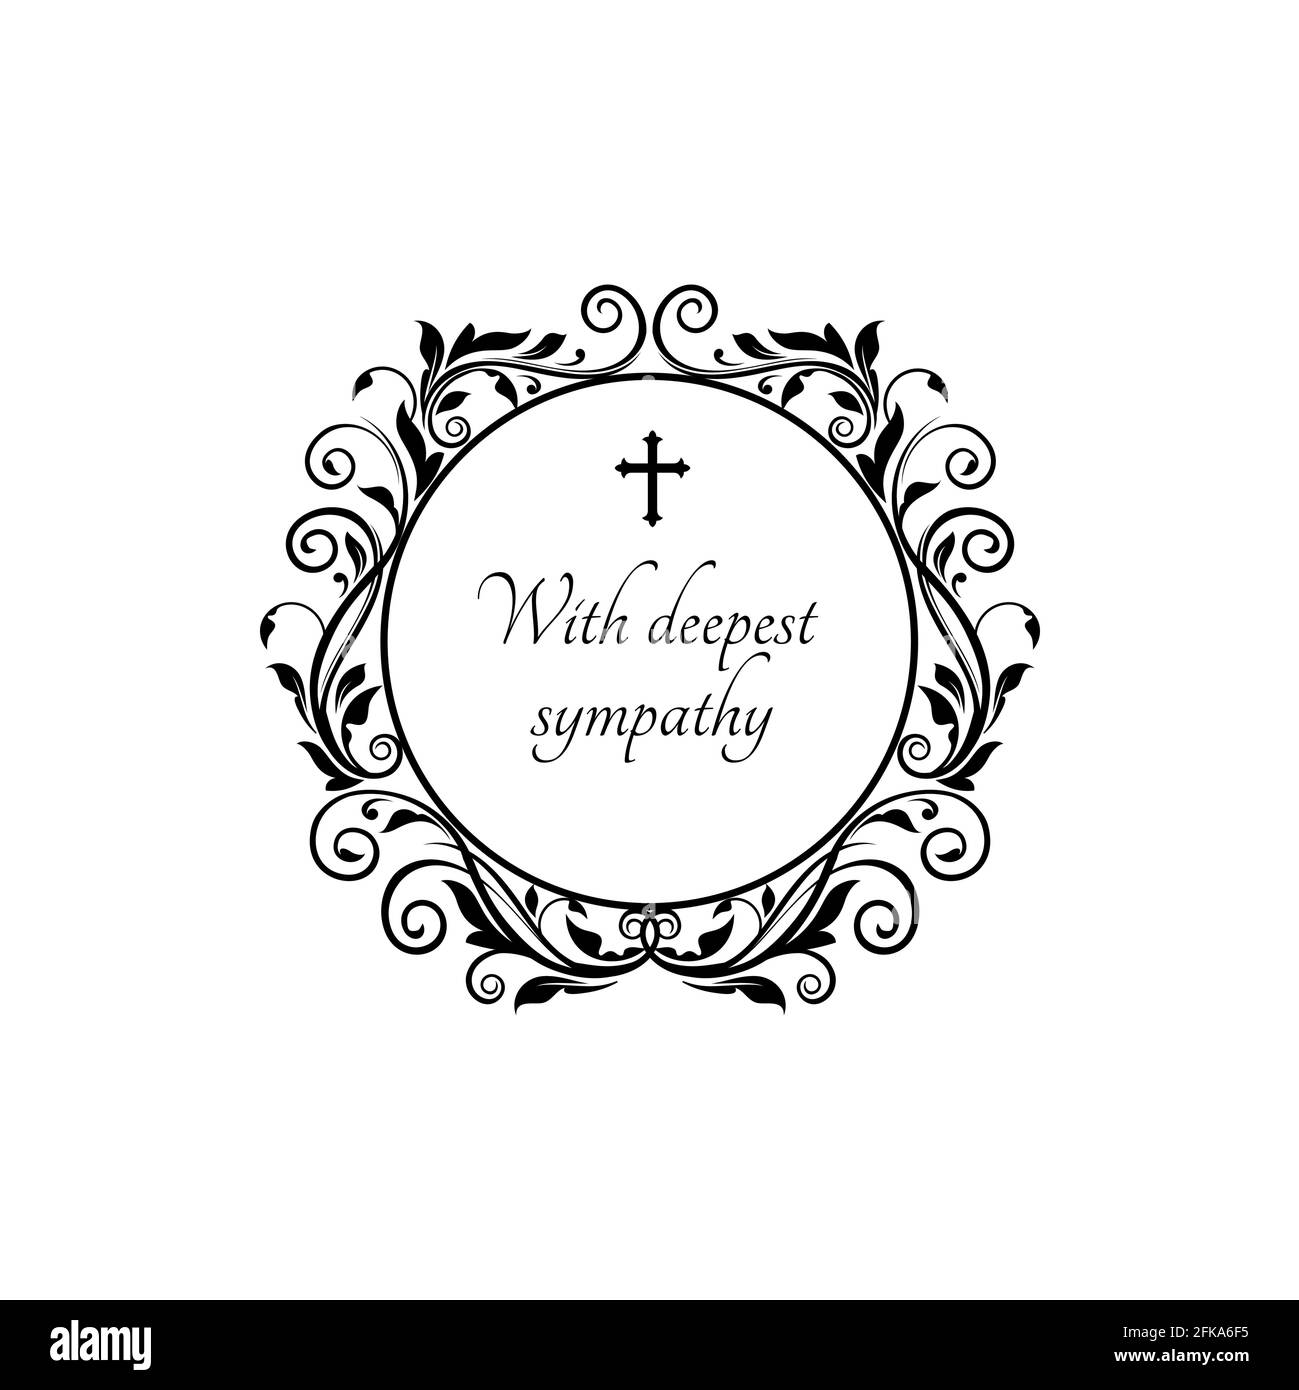 With deepest sympathy message on gravestone with vintage flower ornaments and crucifix cross. Vector funeral lettering on tombstone, round floral bord Stock Vector